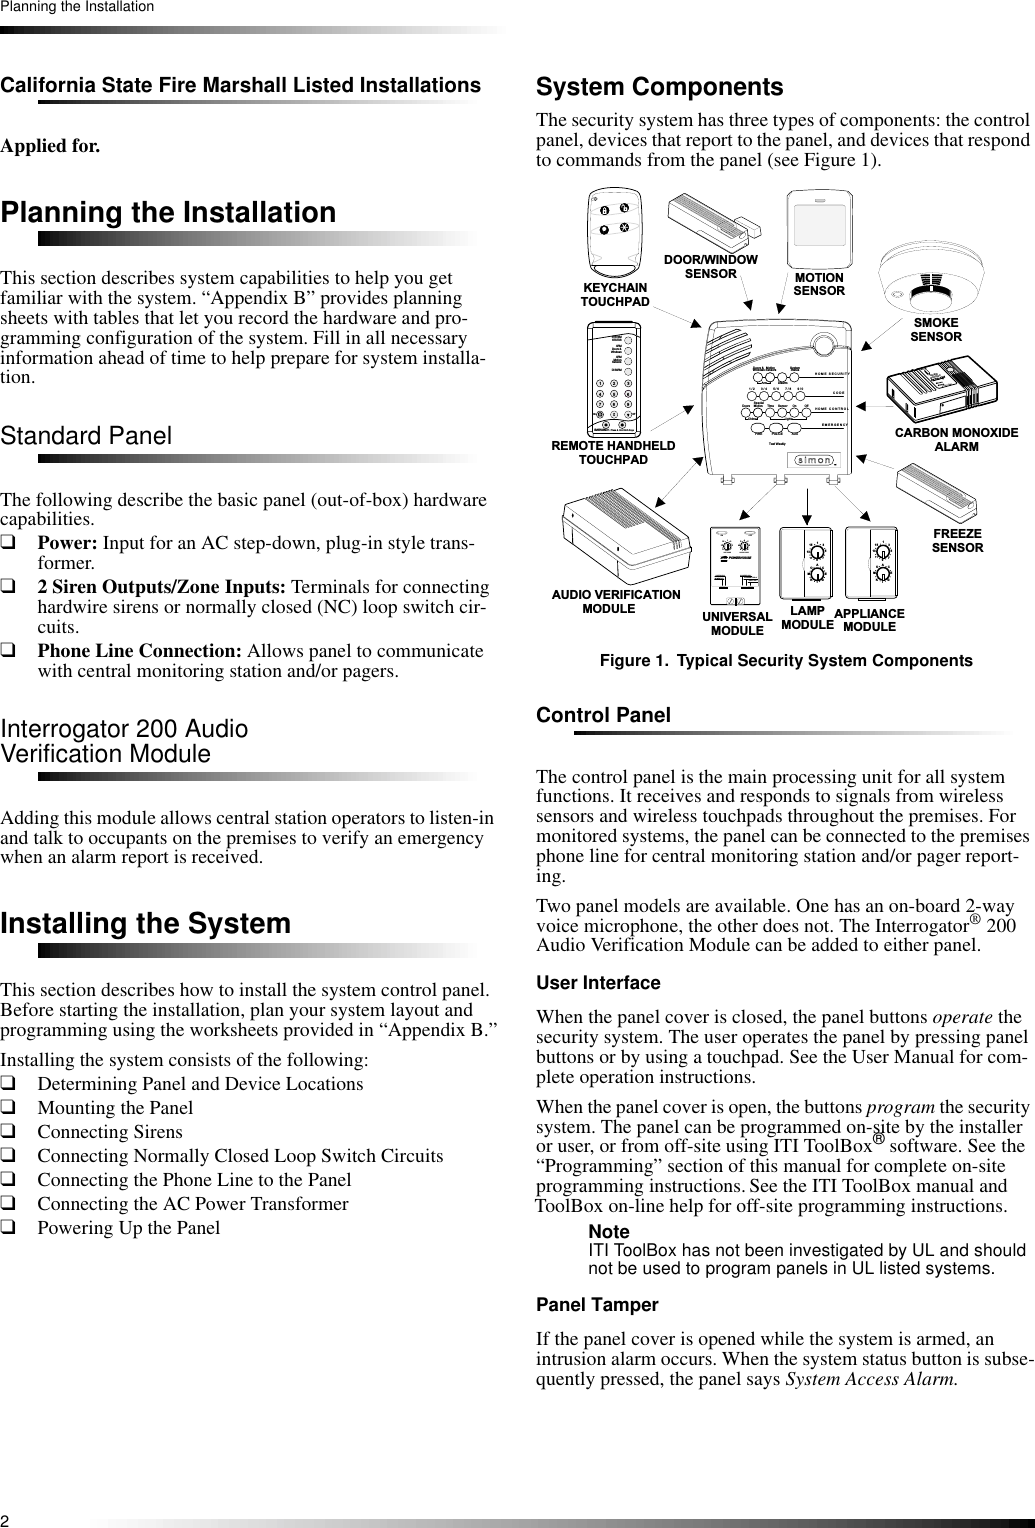 2Planning the InstallationCalifornia State Fire Marshall Listed InstallationsApplied for.Planning the InstallationThis section describes system capabilities to help you get familiar with the system. “Appendix B” provides planning sheets with tables that let you record the hardware and pro-gramming configuration of the system. Fill in all necessary information ahead of time to help prepare for system installa-tion.Standard PanelThe following describe the basic panel (out-of-box) hardware capabilities.❑Power: Input for an AC step-down, plug-in style trans-former.❑2 Siren Outputs/Zone Inputs: Terminals for connecting hardwire sirens or normally closed (NC) loop switch cir-cuits.❑Phone Line Connection: Allows panel to communicate with central monitoring station and/or pagers.Interrogator 200 AudioVerification ModuleAdding this module allows central station operators to listen-in and talk to occupants on the premises to verify an emergency when an alarm report is received.Installing the SystemThis section describes how to install the system control panel. Before starting the installation, plan your system layout and programming using the worksheets provided in “Appendix B.”Installing the system consists of the following:❑Determining Panel and Device Locations❑Mounting the Panel❑Connecting Sirens❑Connecting Normally Closed Loop Switch Circuits❑Connecting the Phone Line to the Panel❑Connecting the AC Power Transformer❑Powering Up the PanelSystem ComponentsThe security system has three types of components: the control panel, devices that report to the panel, and devices that respond to commands from the panel (see Figure 1).Figure 1. Typical Security System ComponentsControl PanelThe control panel is the main processing unit for all system functions. It receives and responds to signals from wireless sensors and wireless touchpads throughout the premises. For monitored systems, the panel can be connected to the premises phone line for central monitoring station and/or pager report-ing.Two panel models are available. One has an on-board 2-way voice microphone, the other does not. The Interrogator® 200 Audio Verification Module can be added to either panel.User InterfaceWhen the panel cover is closed, the panel buttons operate the security system. The user operates the panel by pressing panel buttons or by using a touchpad. See the User Manual for com-plete operation instructions.When the panel cover is open, the buttons program the security system. The panel can be programmed on-site by the installer or user, or from off-site using ITI ToolBox® software. See the “Programming” section of this manual for complete on-site programming instructions. See the ITI ToolBox manual and ToolBox on-line help for off-site programming instructions.Note ITI ToolBox has not been investigated by UL and should not be used to program panels in UL listed systems.Panel TamperIf the panel cover is opened while the system is armed, an intrusion alarm occurs. When the system status button is subse-quently pressed, the panel says System Access Alarm.                               X - 1 0     P O W E R H O U S E13591 371 11 5 ACEIMGKOU N IT   C O D E H O U S E   C O D EC O N T IN U O U SM O M E N T A R YS O U N D E R   O N L YS O U N D E R   &amp;  R E L A YR E L A Y  O N L YO N O F FD O O R / W I N D O WS E N S O RL A M PM O D U L E A P P L I A N C EM O D U L EU N I V E R S A LM O D U L ER E M O T E   H A N D H E L DT O U C H P A DM O T I O NS E N S O RK E Y C H A I NT O U C H P A DS M O K ES E N S O R13591 371 11 5ACEIMGKO13591 371 11 5ACEIMGKO7418 95263O f fsPE M E R G E N C YO nd&amp;sr e s H o l hB to eK yD I S A R MS Y S T E MS T A T U SD o o r s   &amp;W i n d o w sA R MA R MS e n s o r sM o t i o n-A U D I O   V E R I F I C A T I O N                  M O D U L EH  O  M  E    S  E  C  U  R  I T  YC   O  D   EH   O  M   E       C   O   N   T  R   O   LE  M   E   R   G   E   N   C  YS ta t u sS y s t e m9  / 0S e n s o r sM o t i o n5  / 6D is a r m7  / 8W i n d o w sD o o r s   &amp;1  / 2A r m3  / 4O f fO nA U XS e n s o rT i m eP O L I C EL i g h t sT e s t   W e e k lyS p e c i a lM o t i o nD o o r sF I R EC h i m eF R E E Z ES E N S O RC A R B O NM O N O X I D ED E T E C T O RD O   N O T  P A I N TC A R B O N   M O N O X I D EALARM